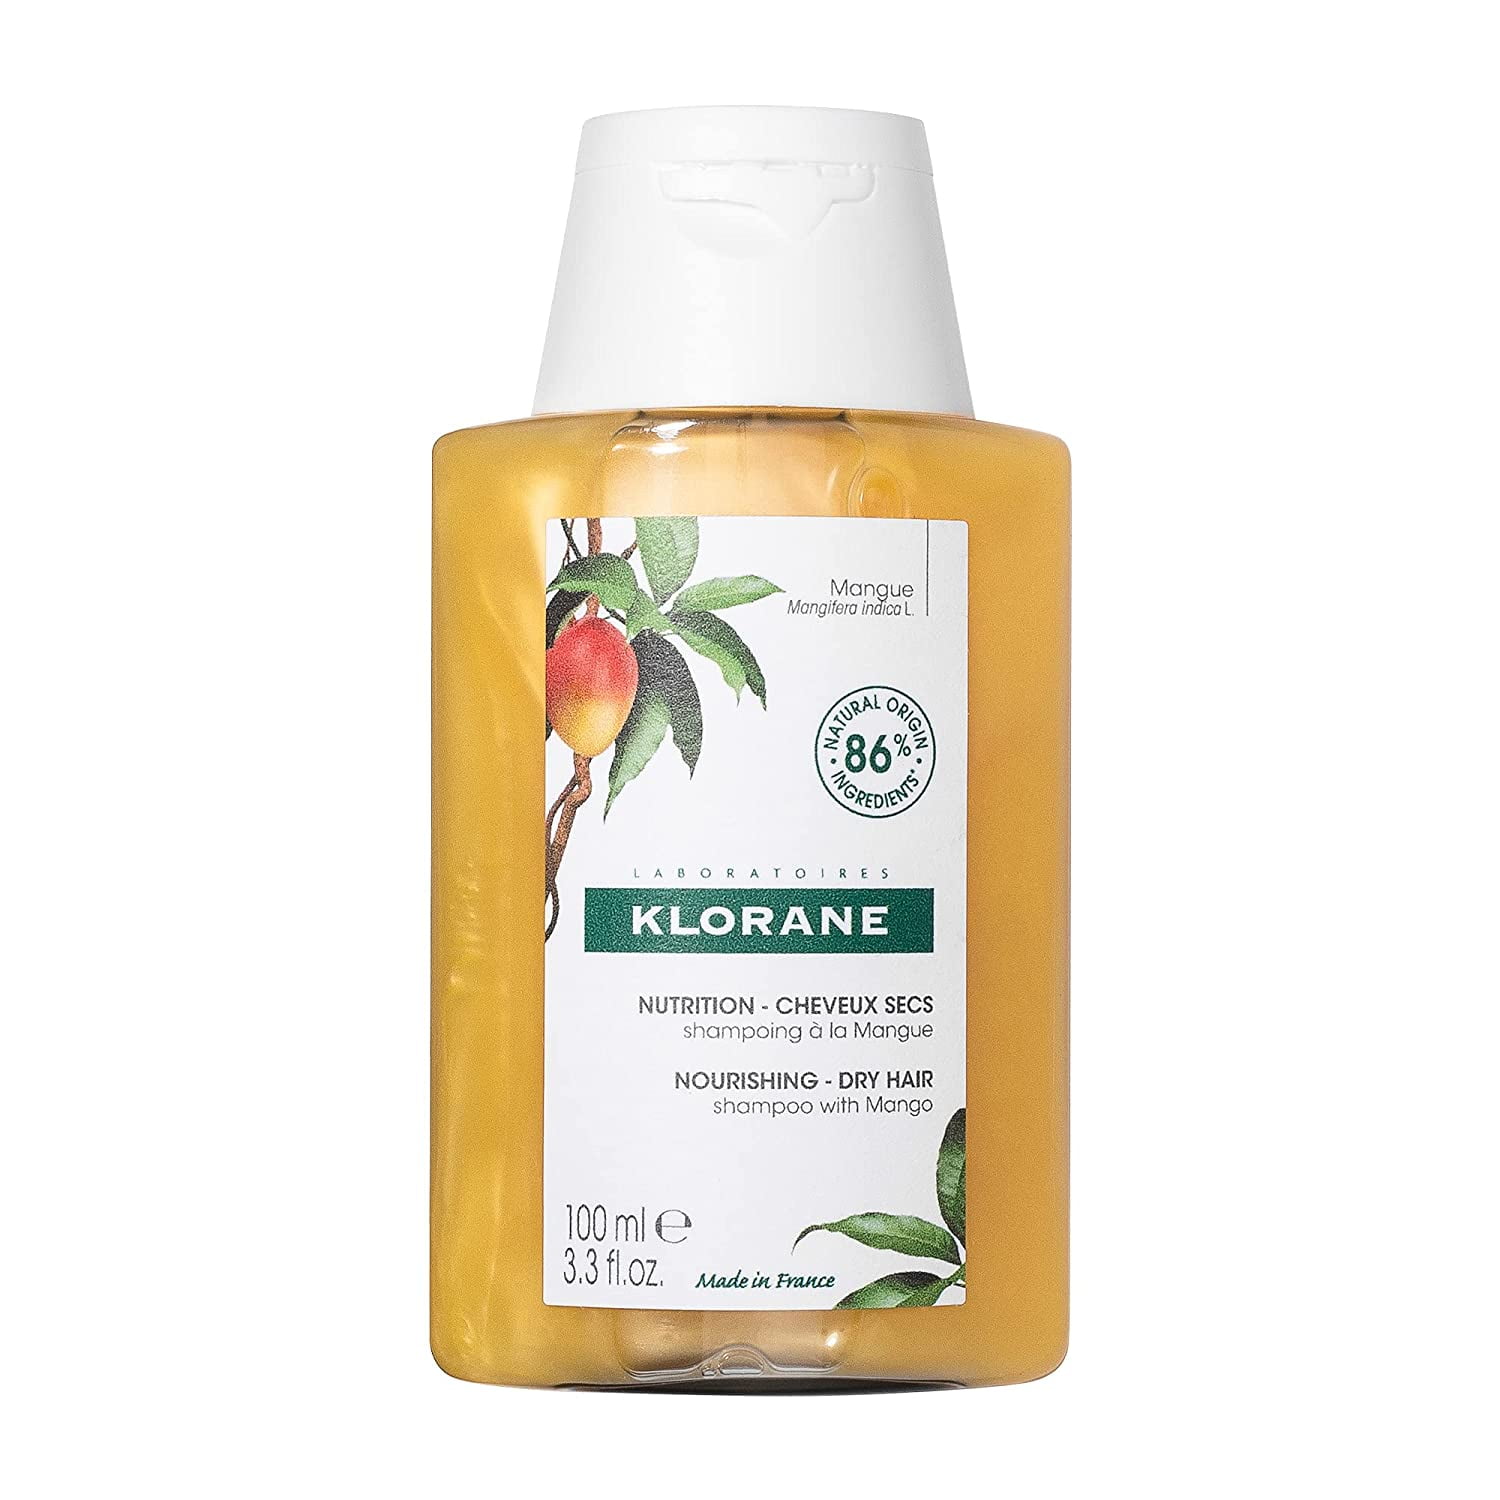 Hare Mysterium Ass Klorane Nourishing Shampoo With Mango Butter, Moisturize and Hydrate Dry  Hair, Paraben, Silicone, Sls Free, Travel Size, 3.3 oz - Walmart.com